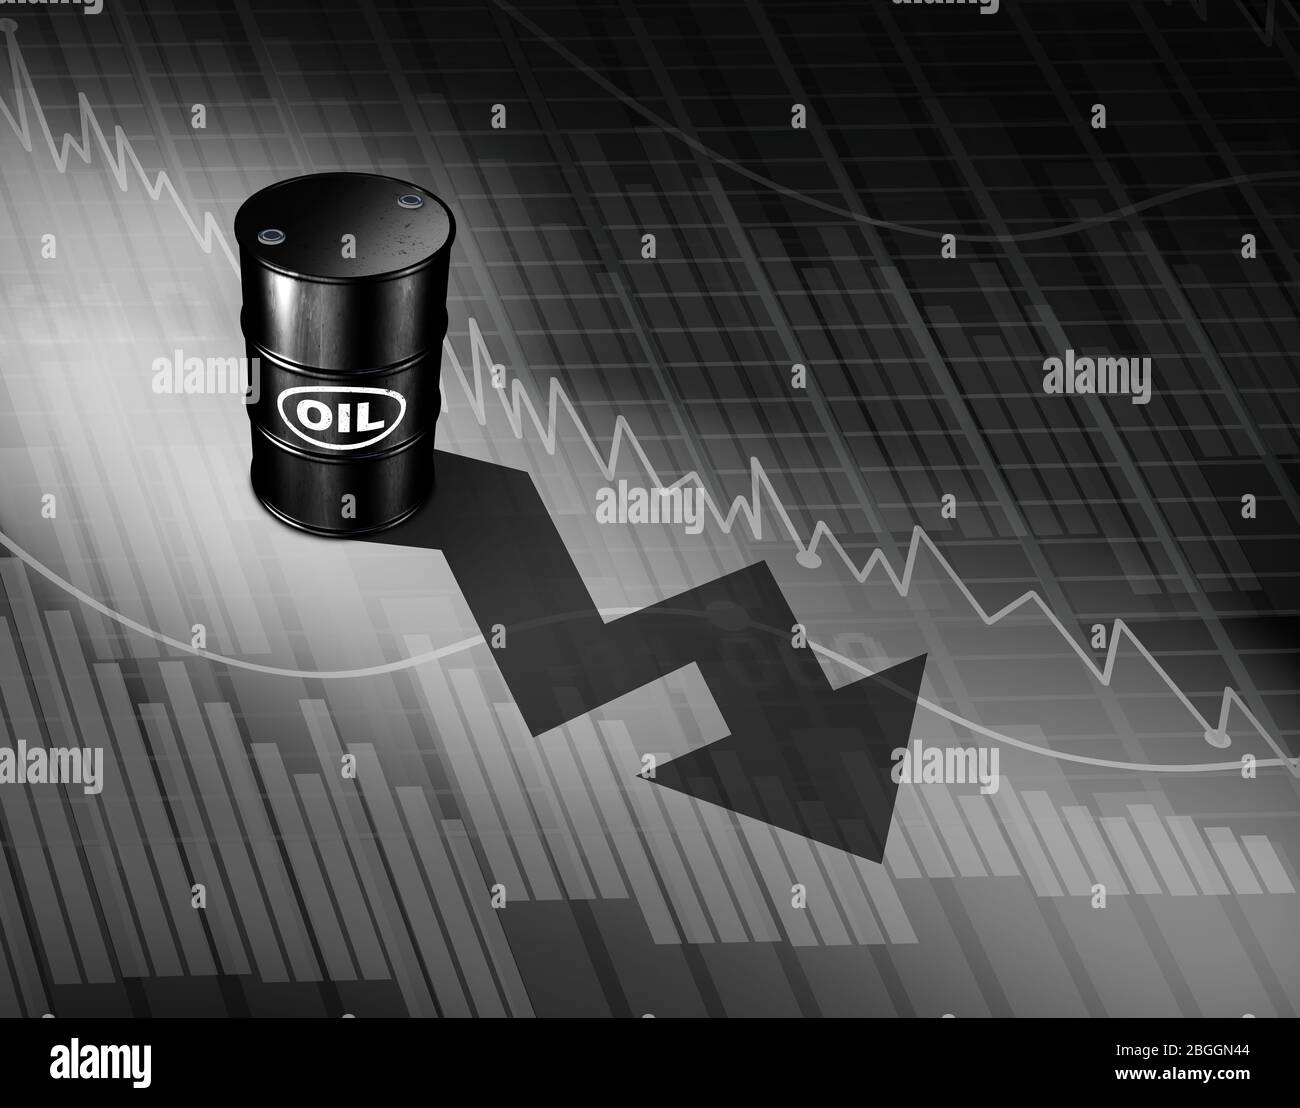 Oil prices falling concept as a barrel of crude petroleum casting a downward arrow on a financial chart as a symbol for declining fossil energy. Stock Photo